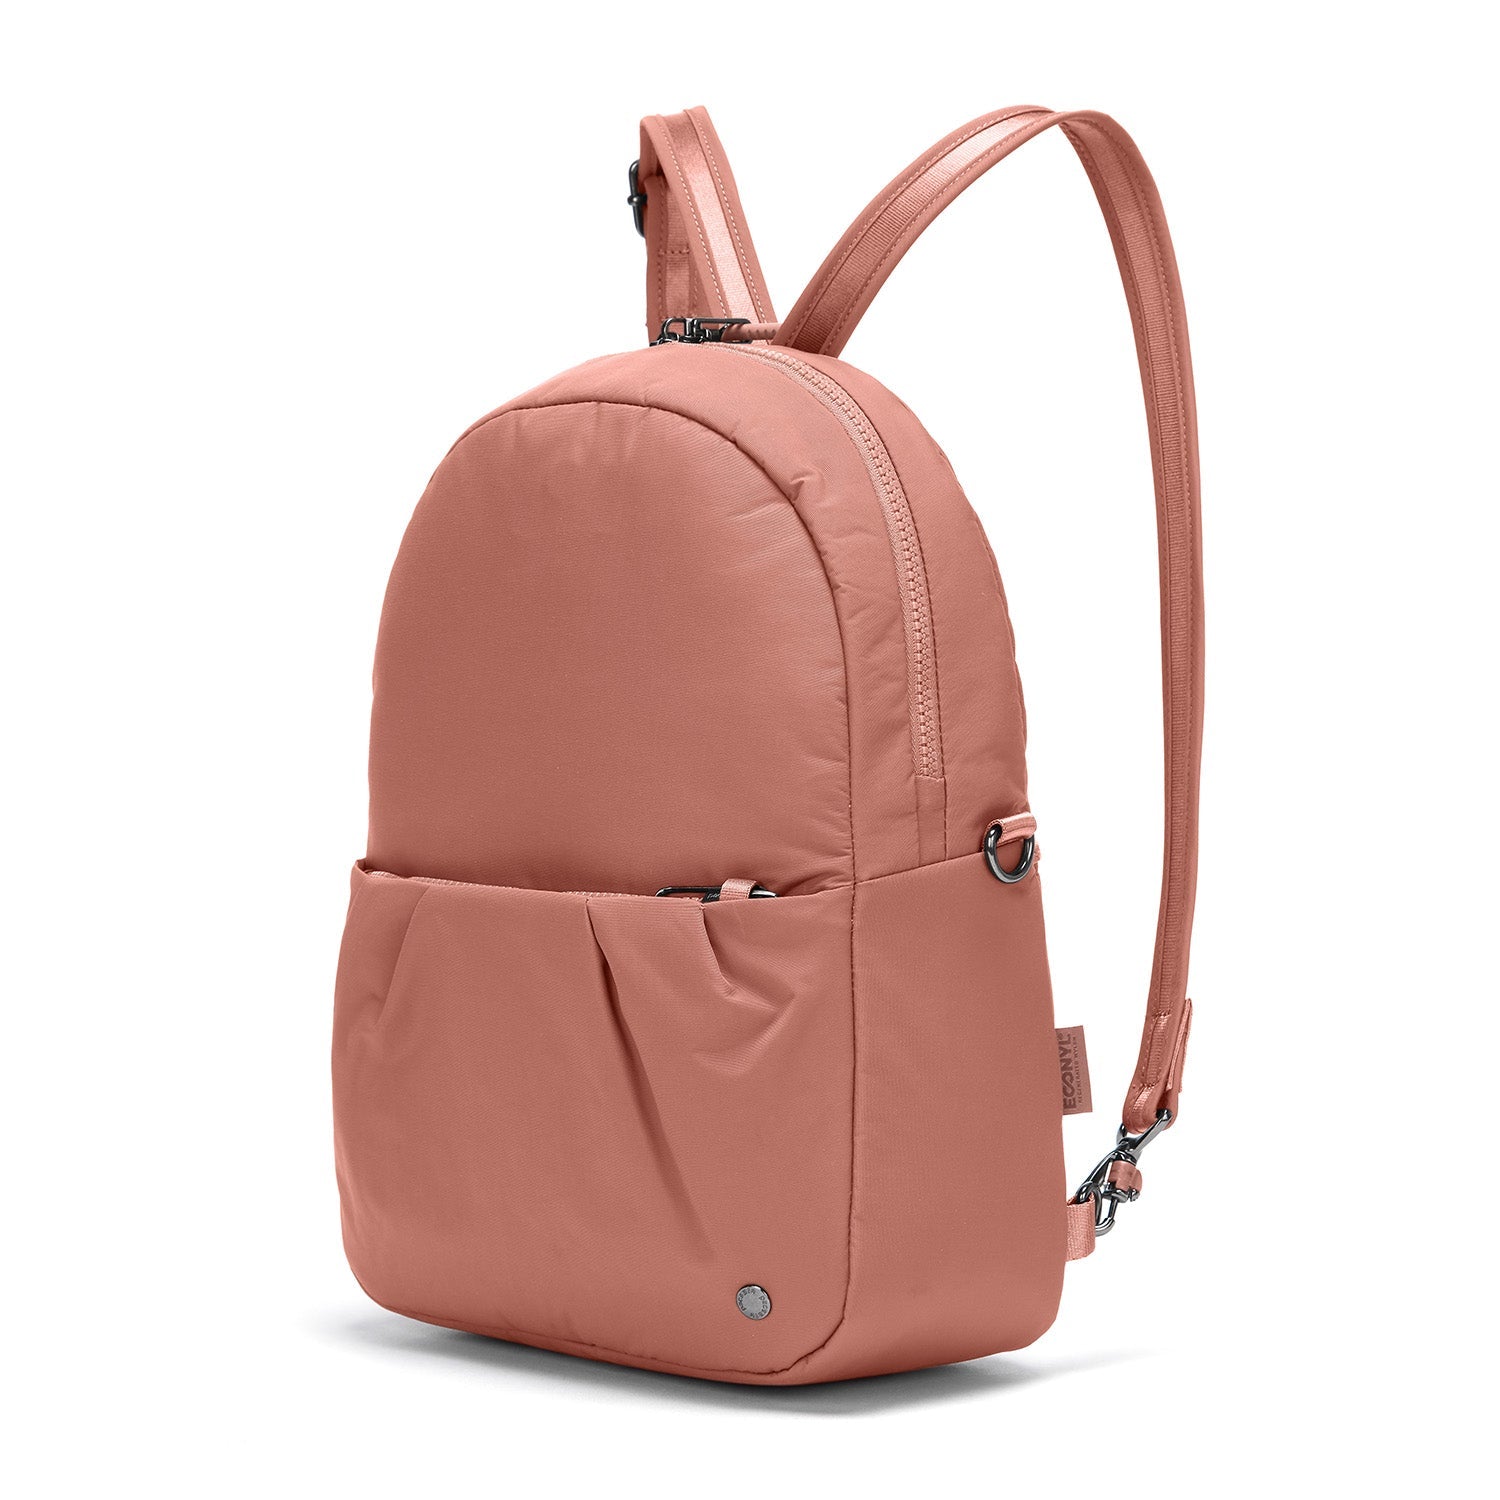 Pacsafe - CX Convertible Backpack - Rose-8